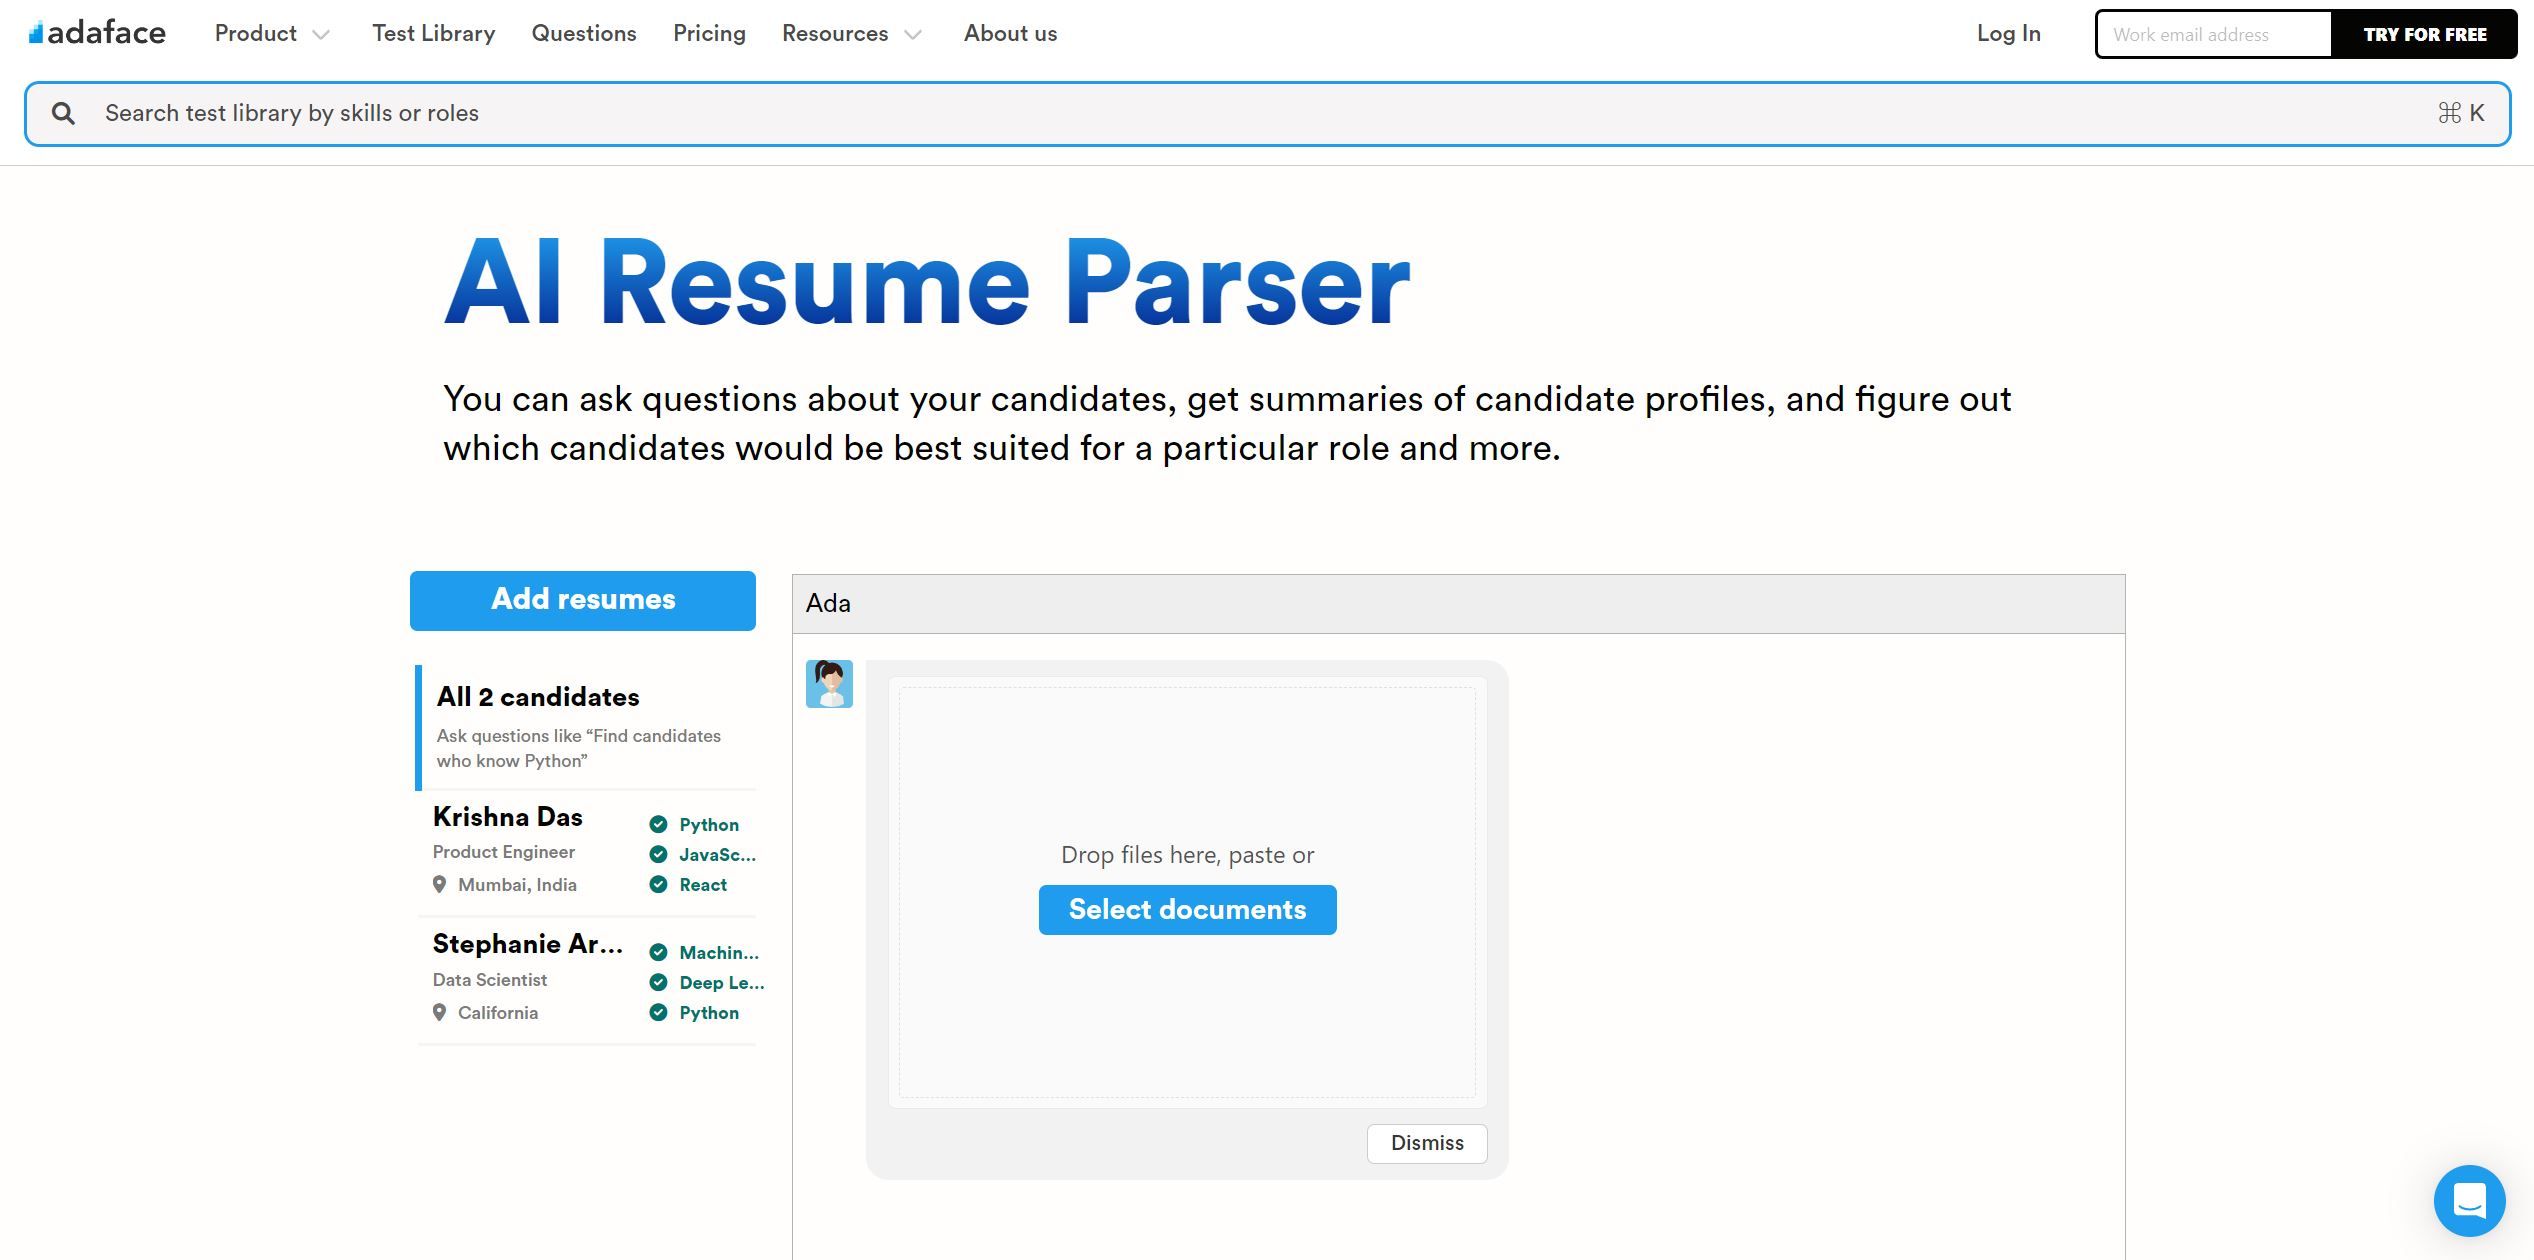  Get summaries of candidate profiles, and figure